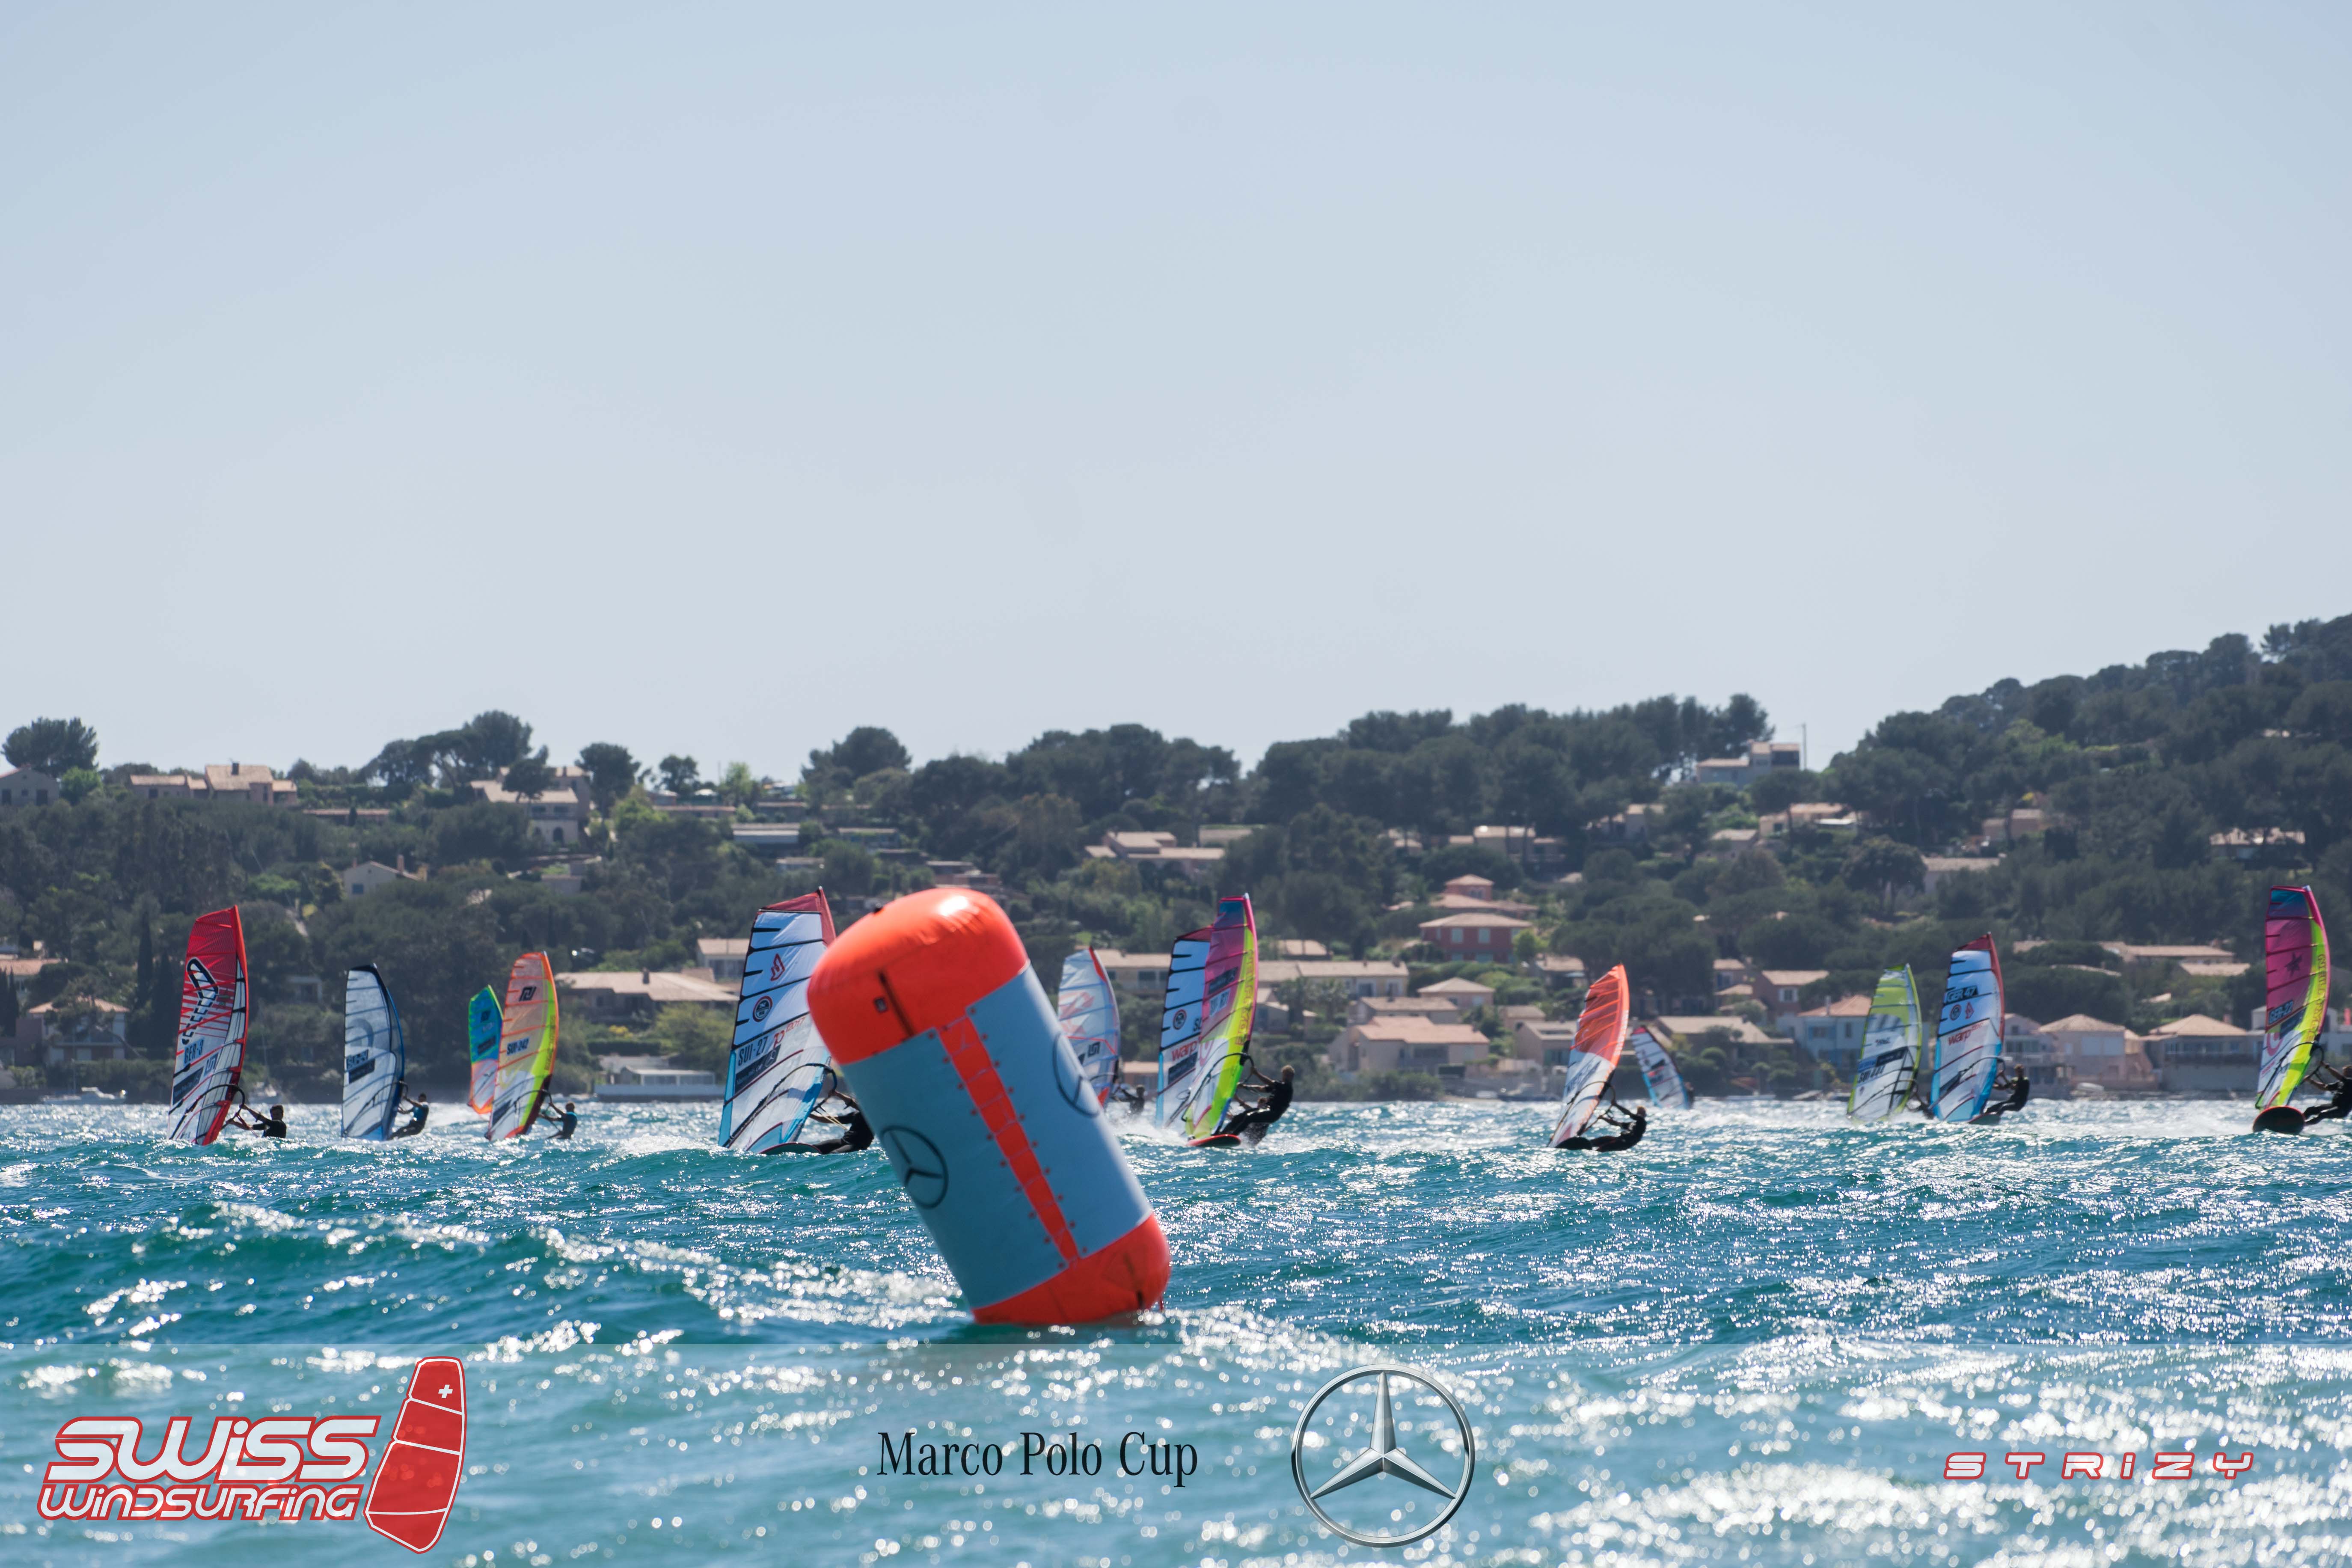  Windsurfing  Marco Polo Cup  Slalom  Hyeres FRA  Final results